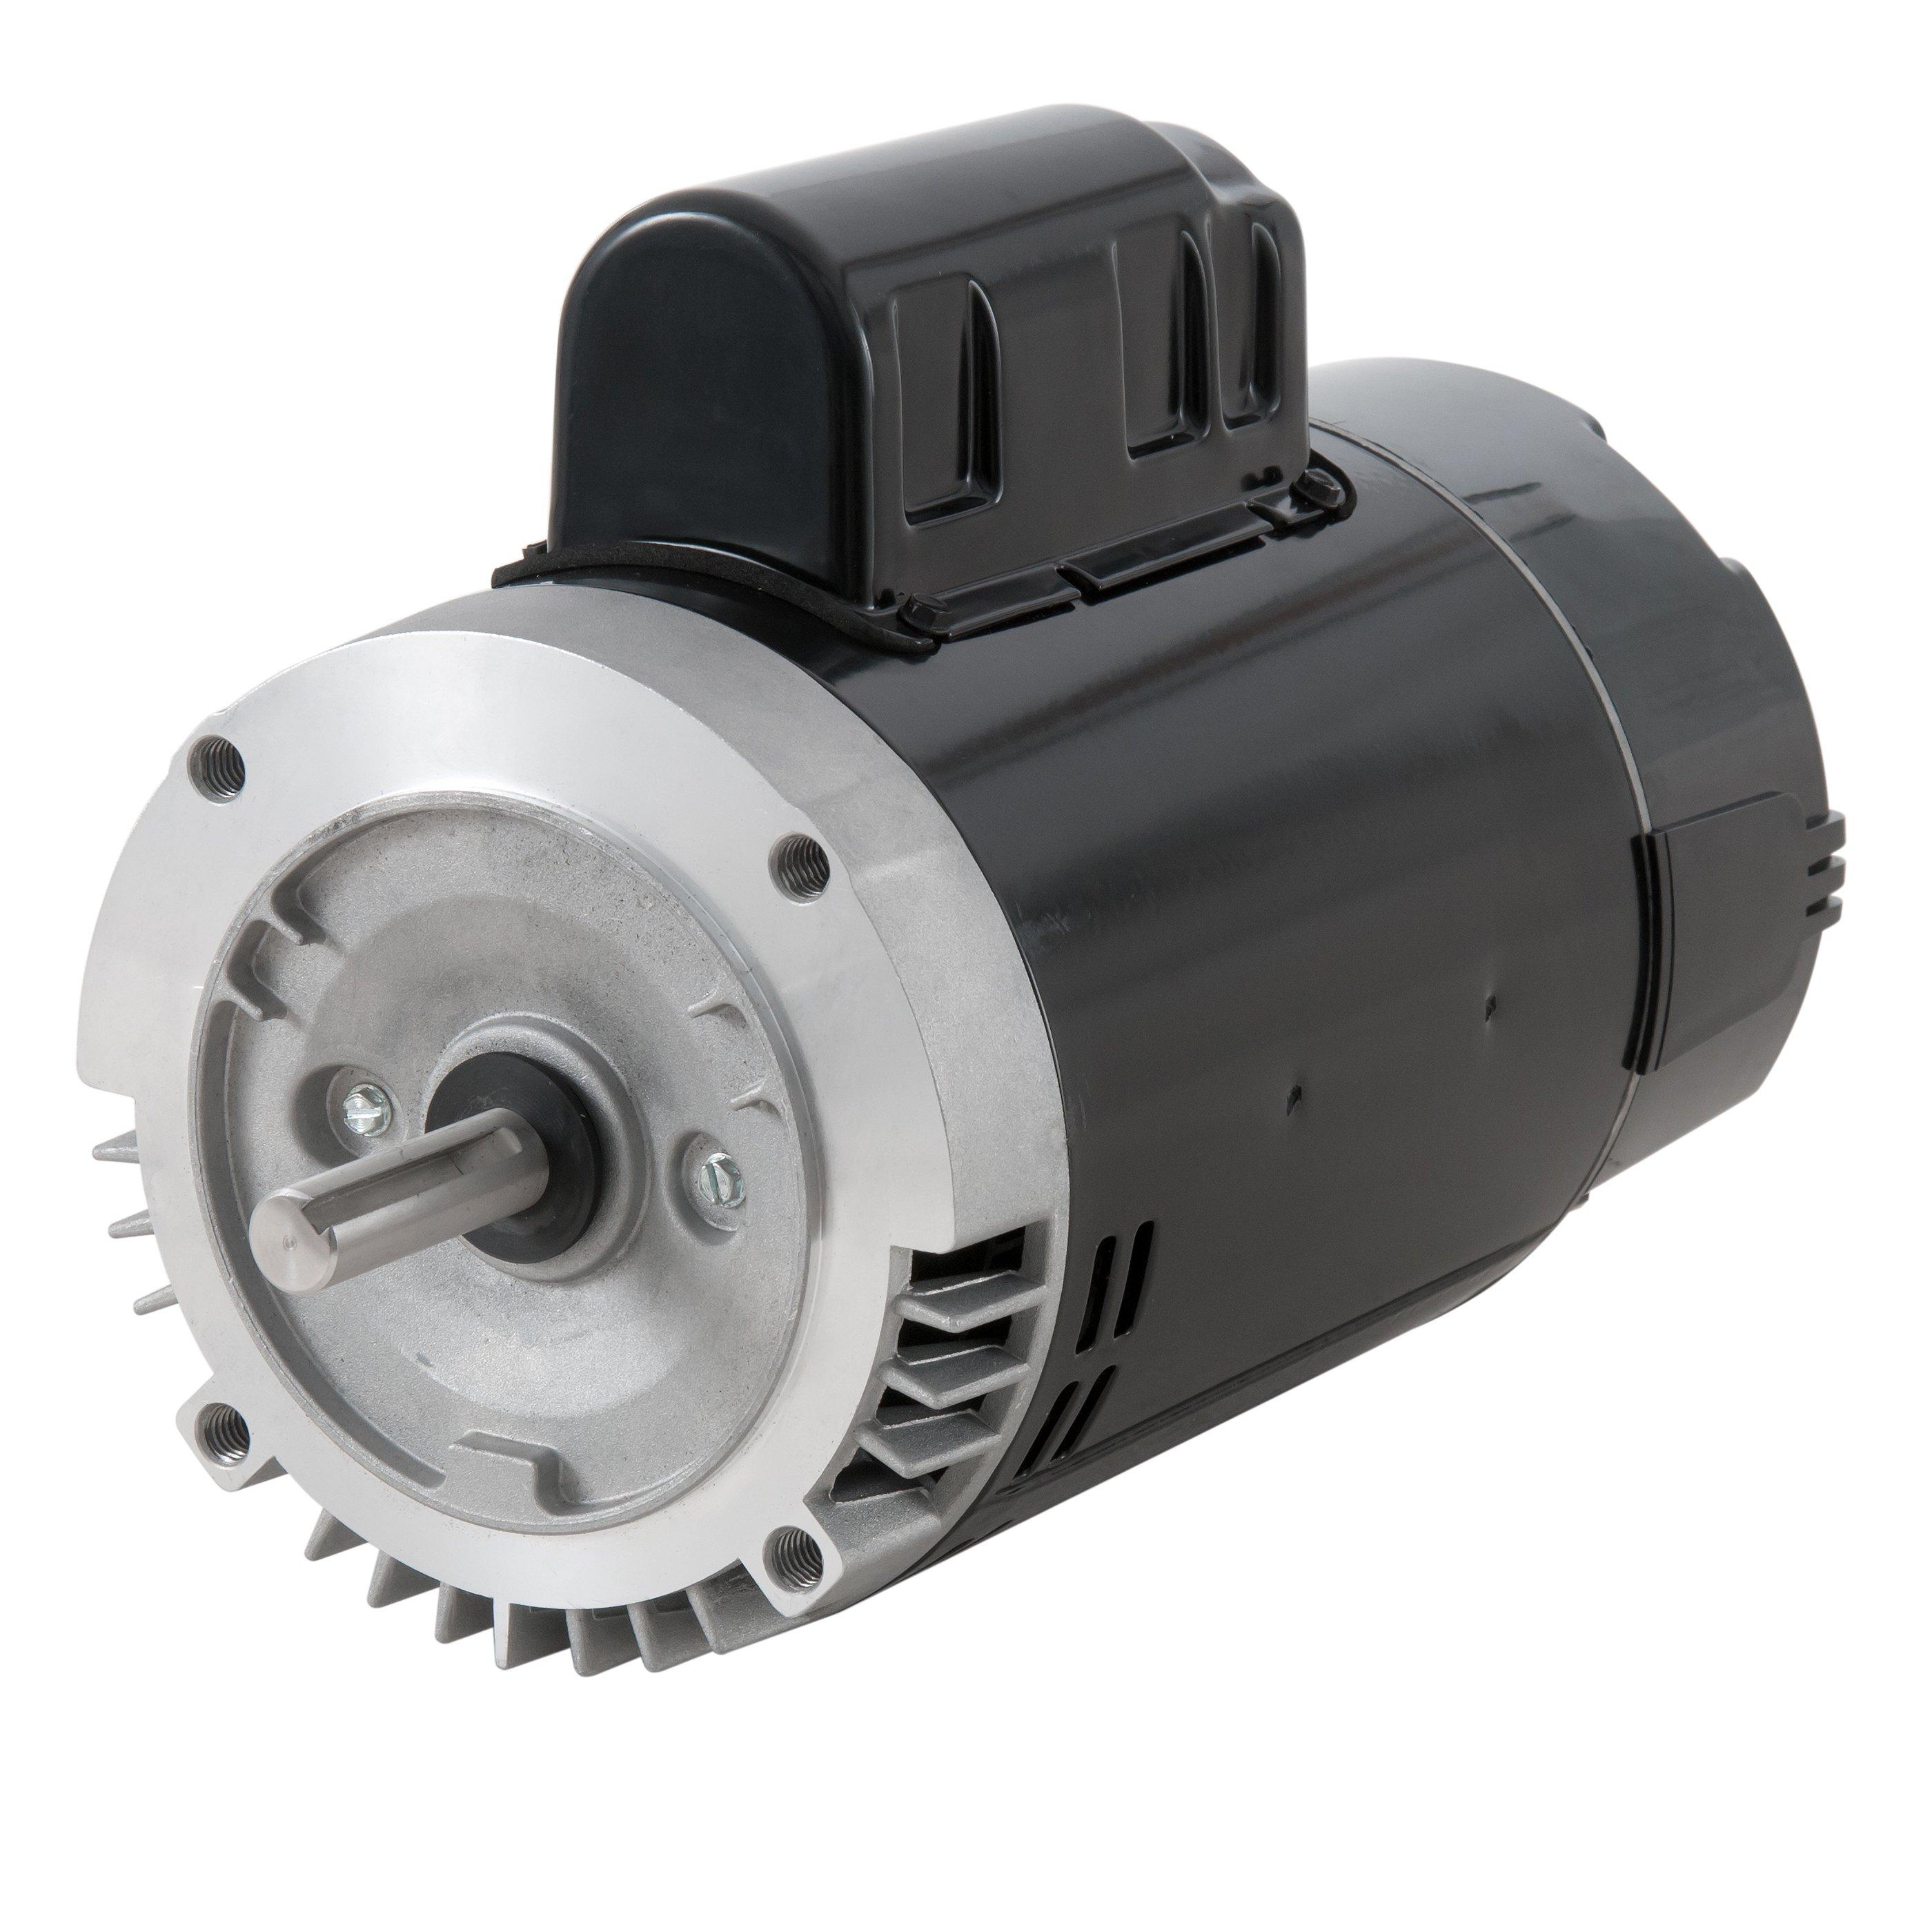 Emerson 56c C-flange 2-speed 3/4 / 0.10hp Full Rated Pool And Spa Motor